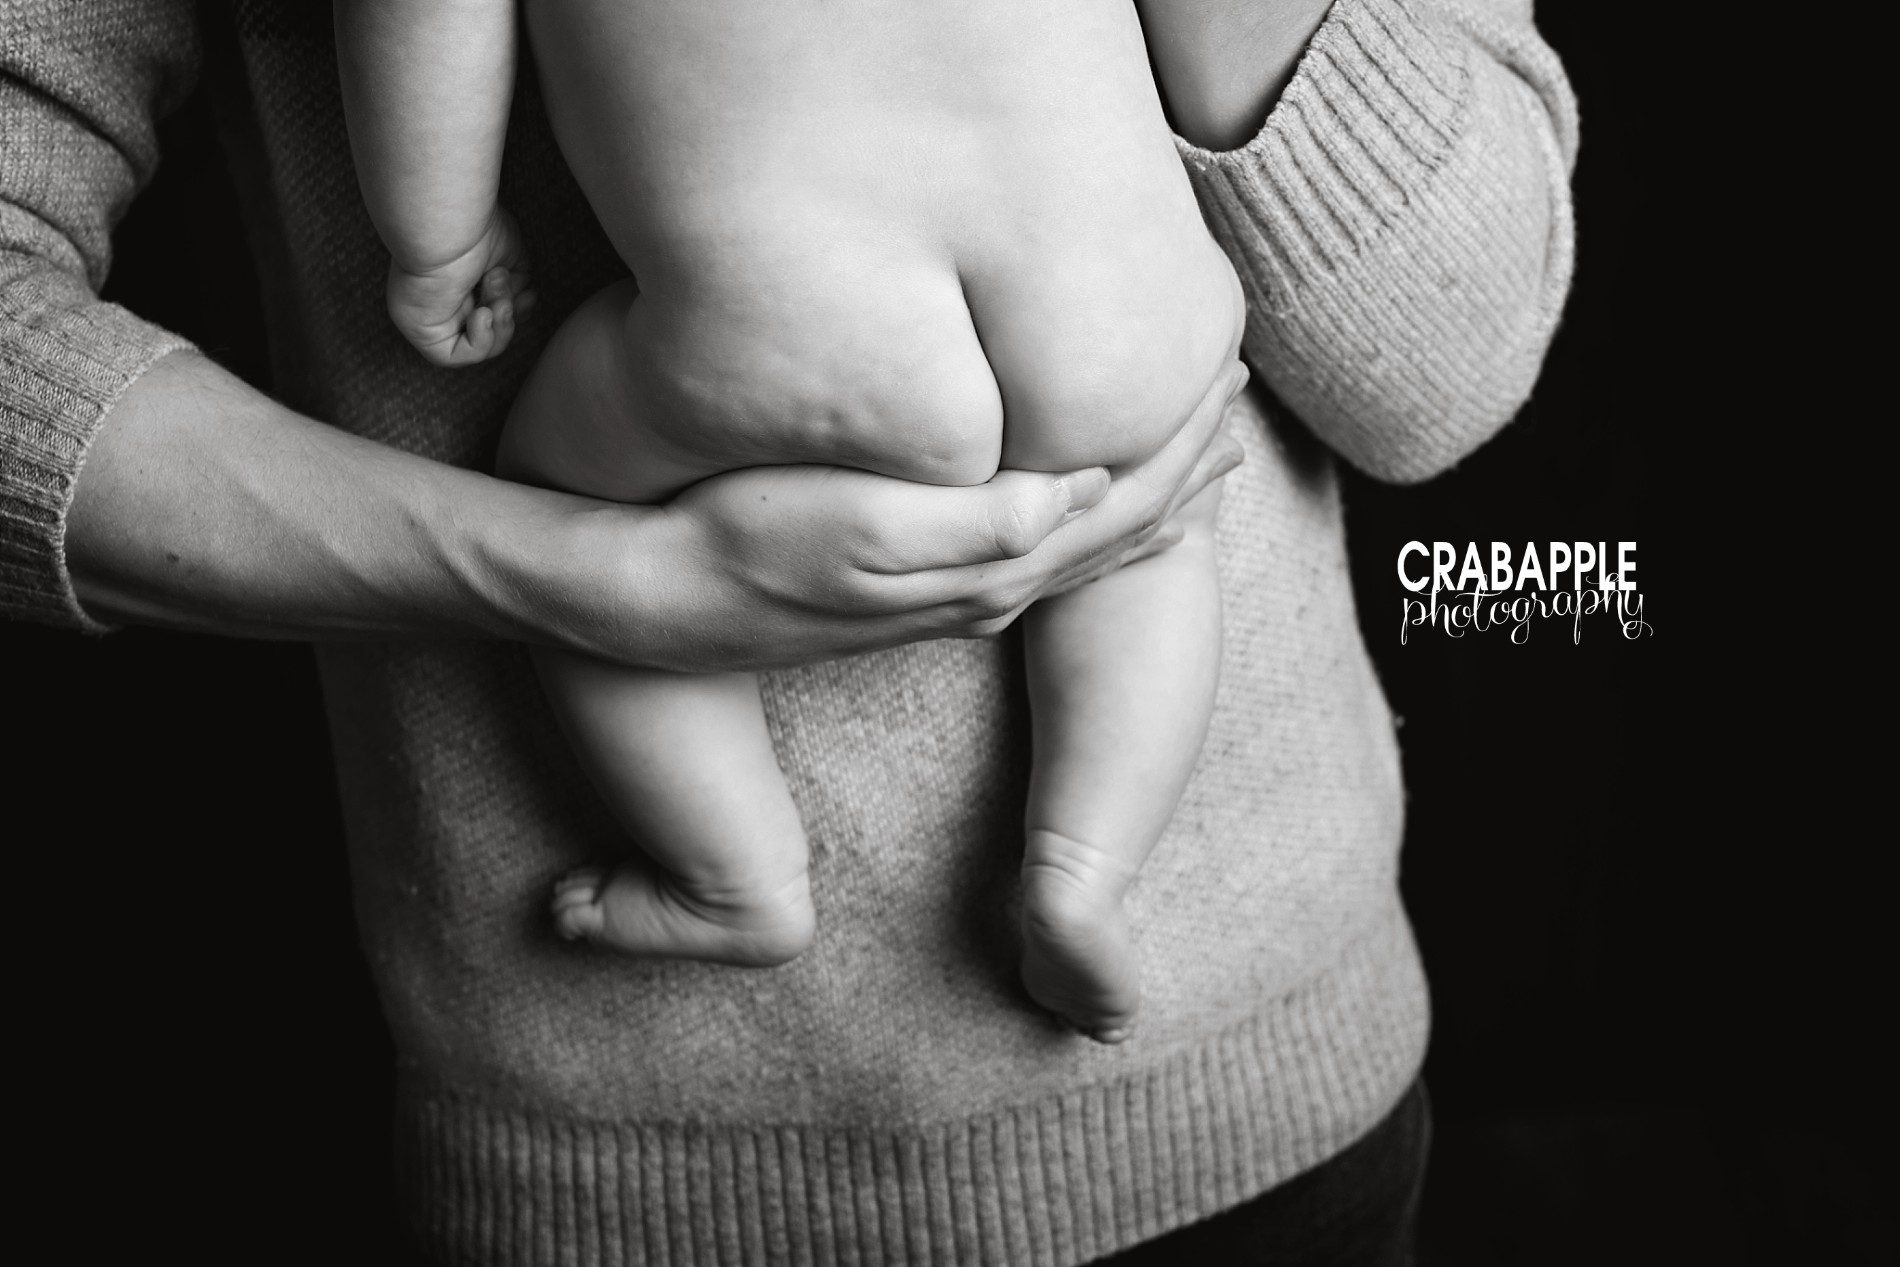 Black and white photo of a dad holding his son in his arms, showing son's bottom half and dad's hand and arm only.